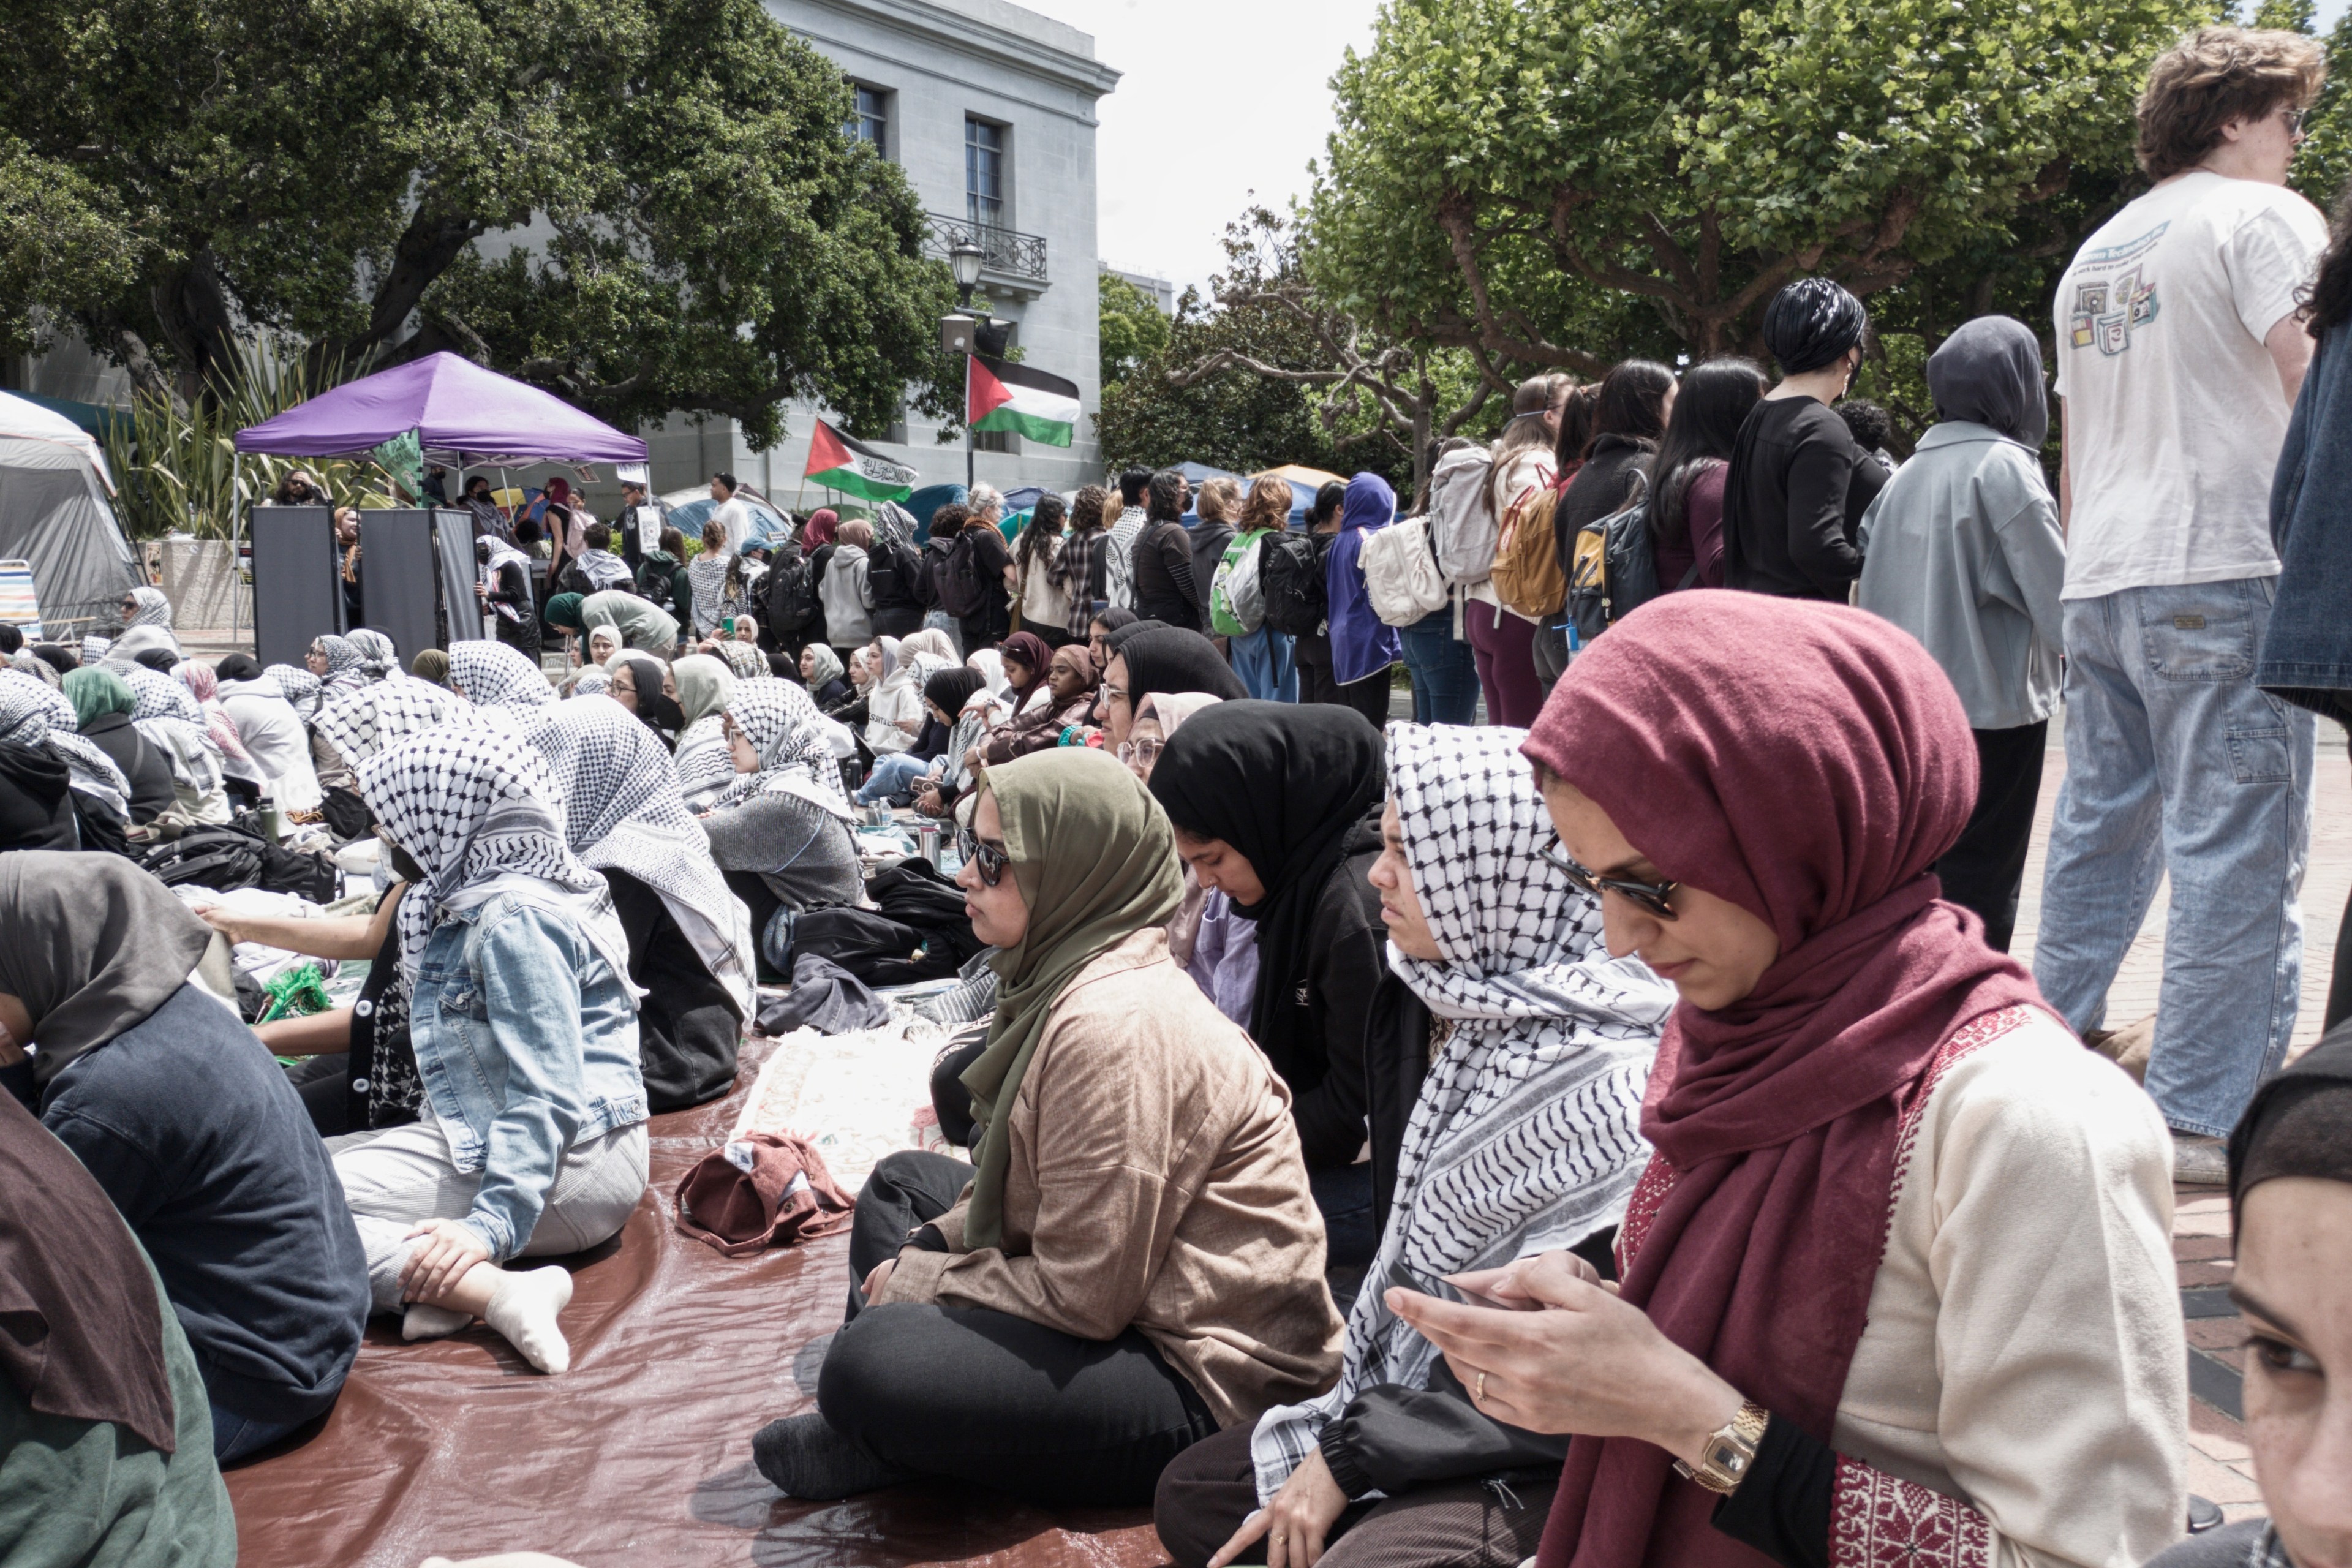 A diverse crowd is gathered outside, some sitting on the ground, others standing, many wearing headscarves, near tents and flags.